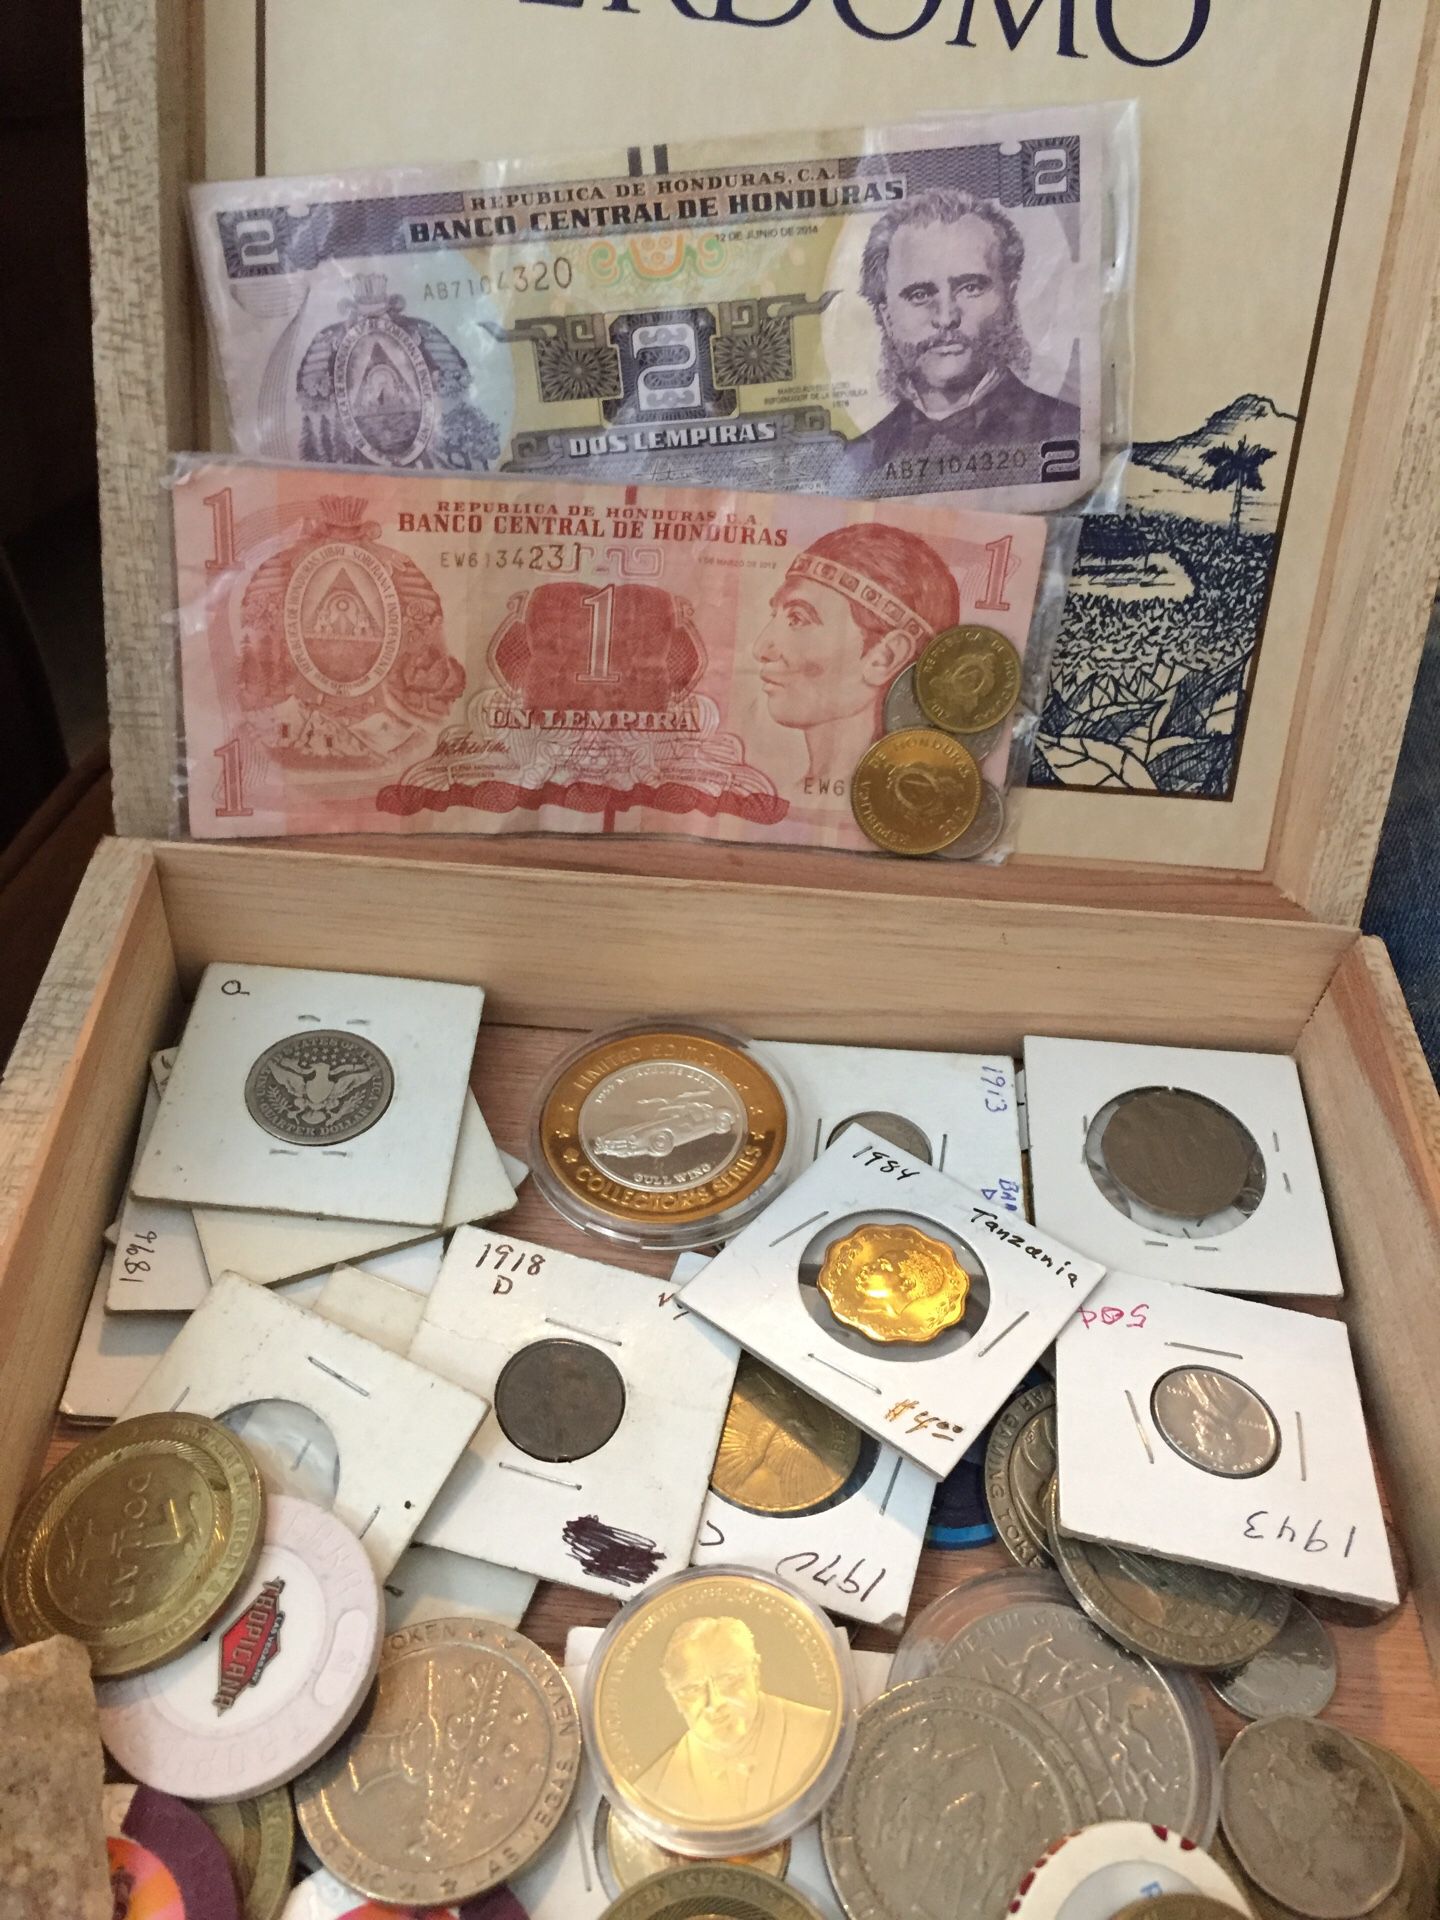 Assorted coins from various countries